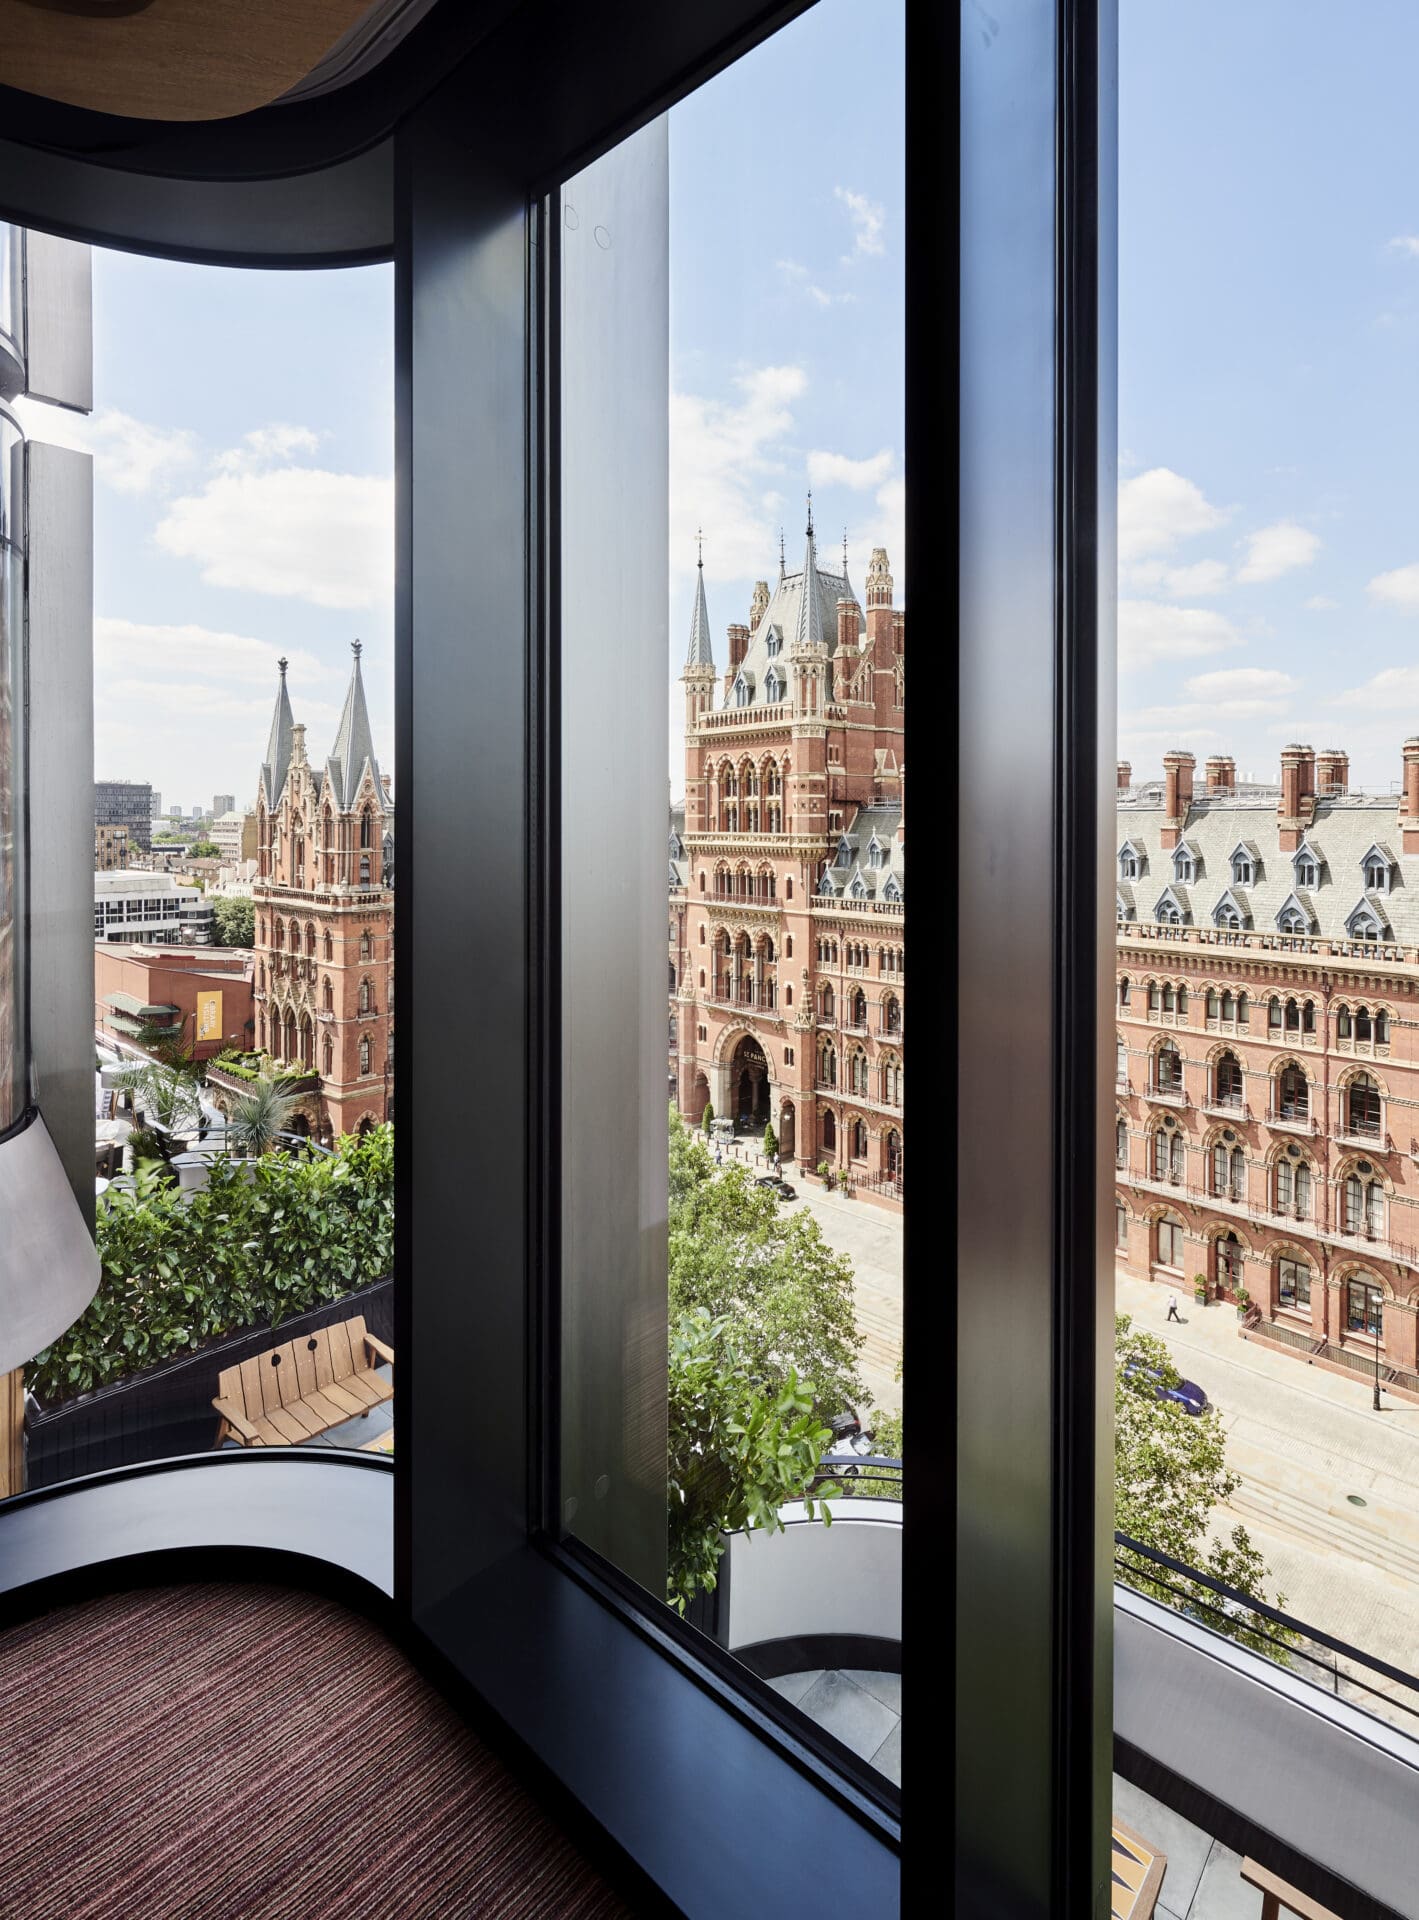 Best hotels London | A corner room at The Standard, with floor-to-ceiling views over St Pancras Station